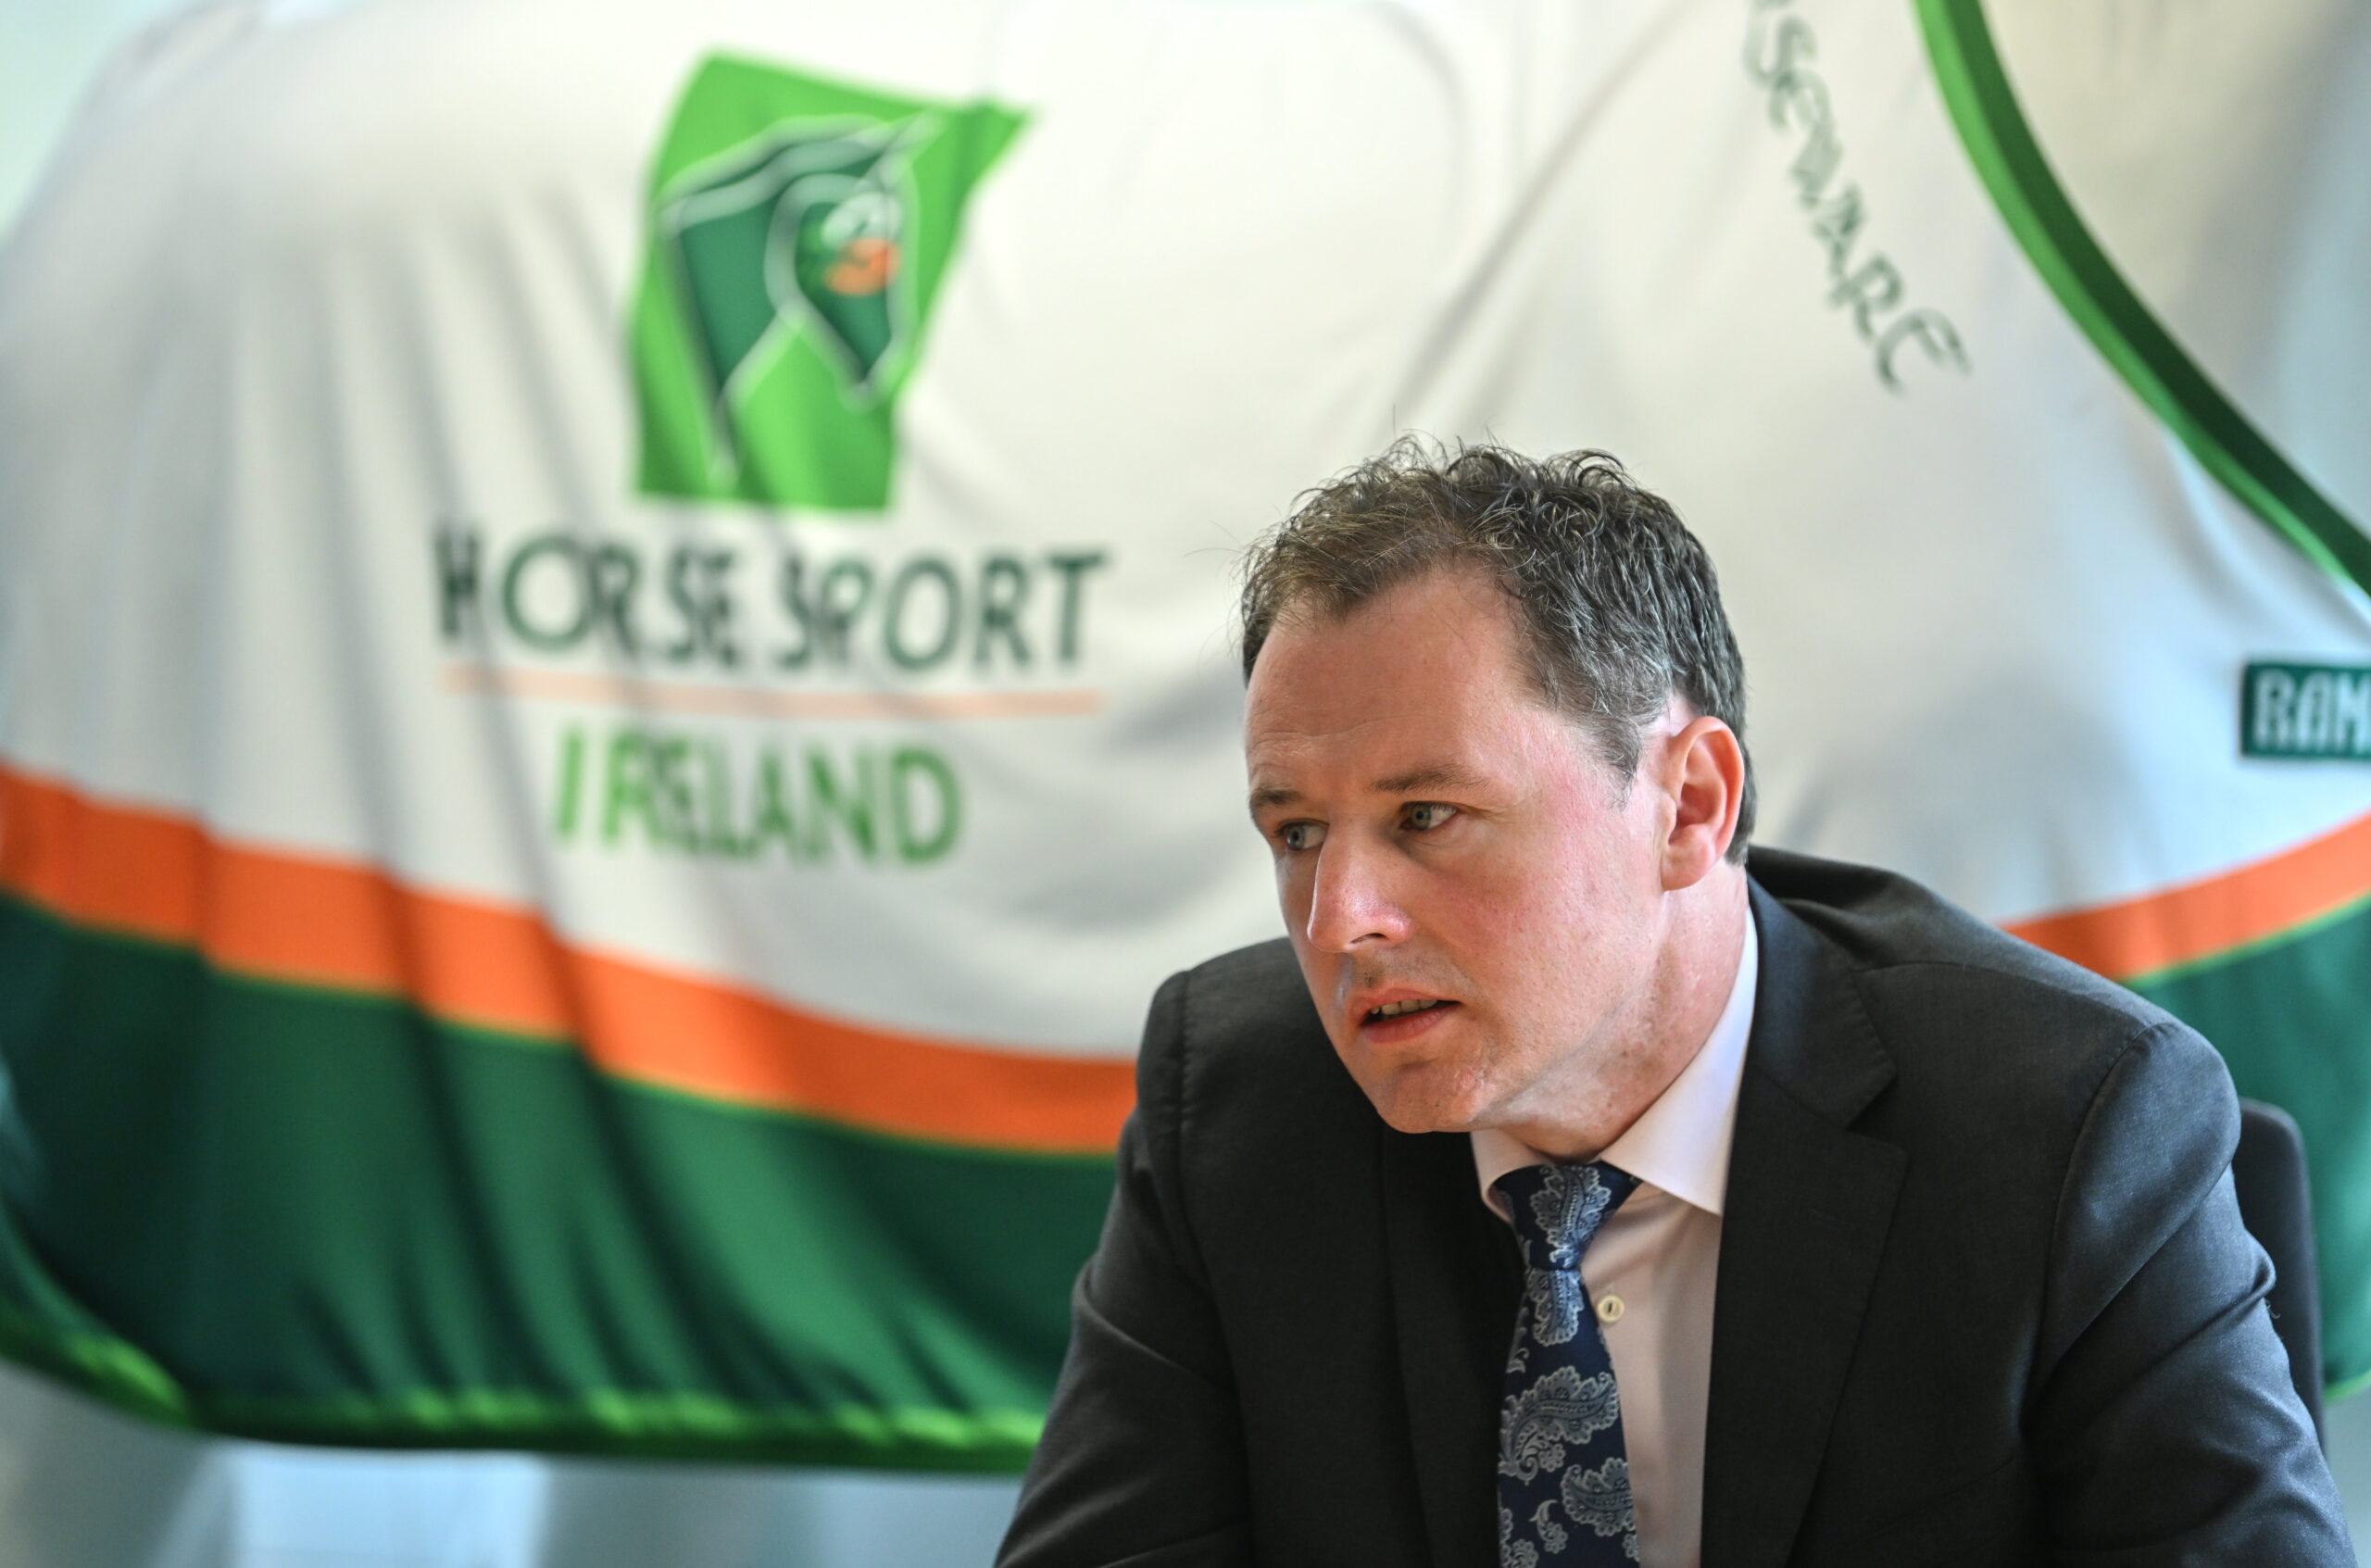 Governing body releases annual report as Horse Sport In Ireland enters golden era